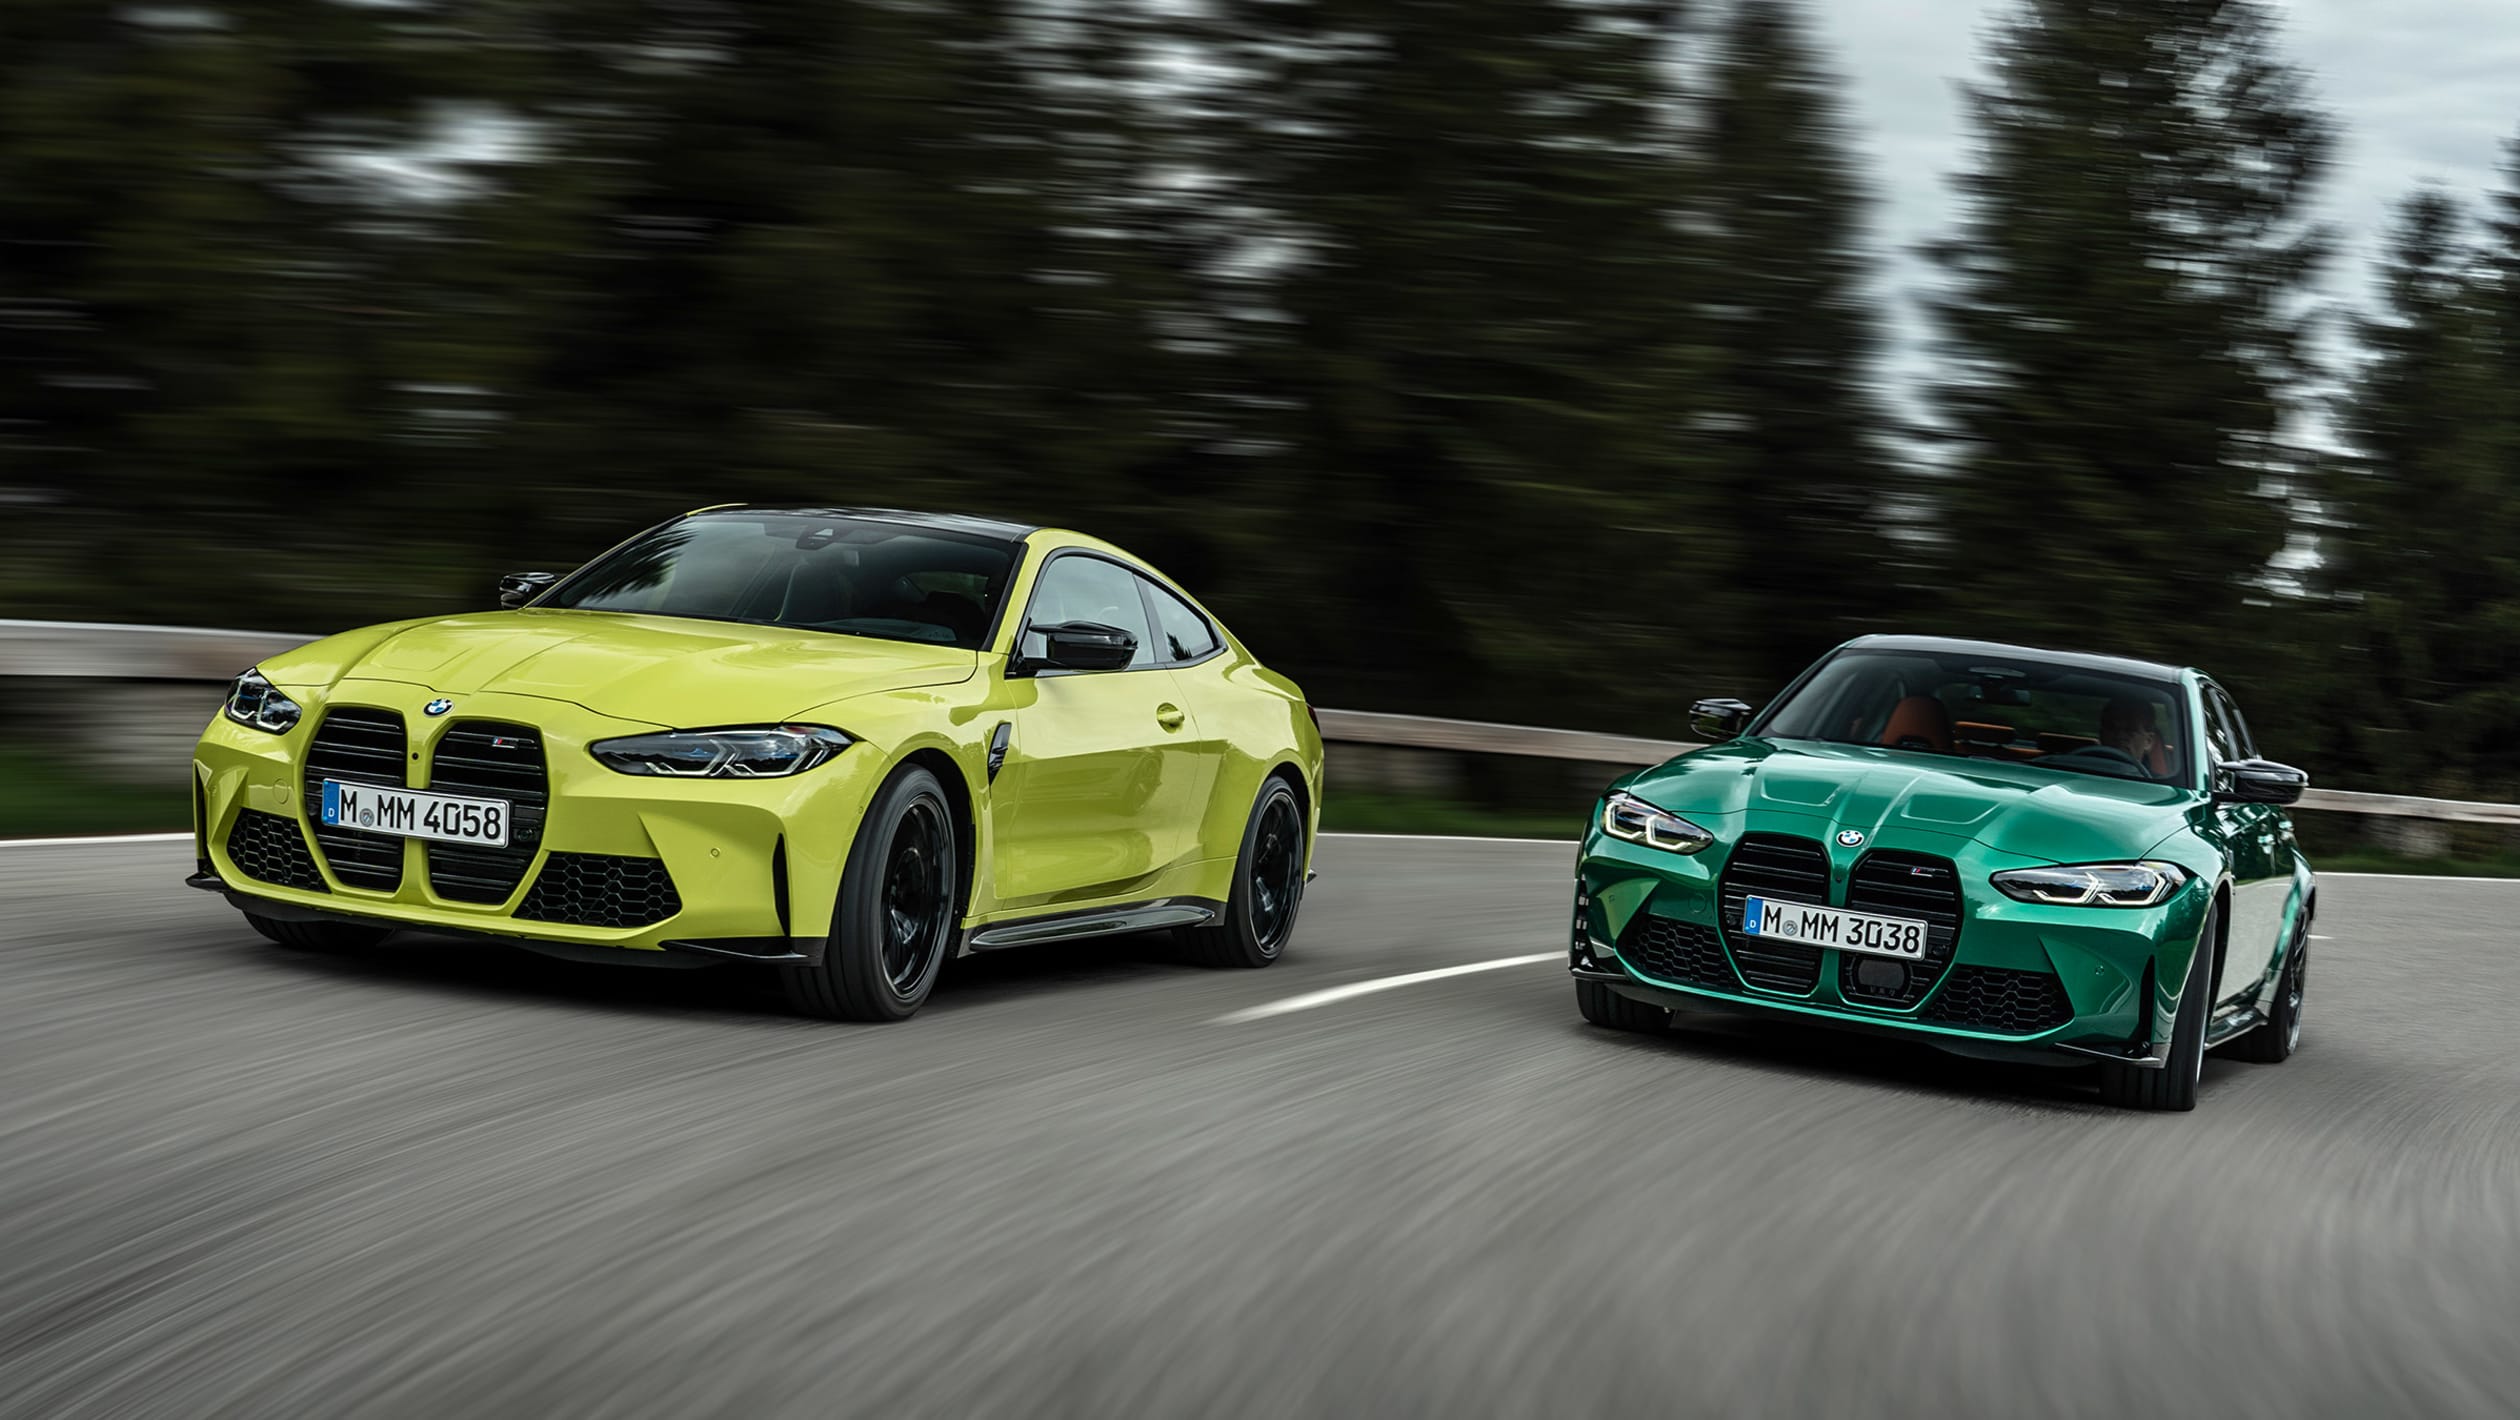 New BMW M3 and M4 pack more than 500bhp, feature four-wheel drive and a 10-stage traction control system to play with